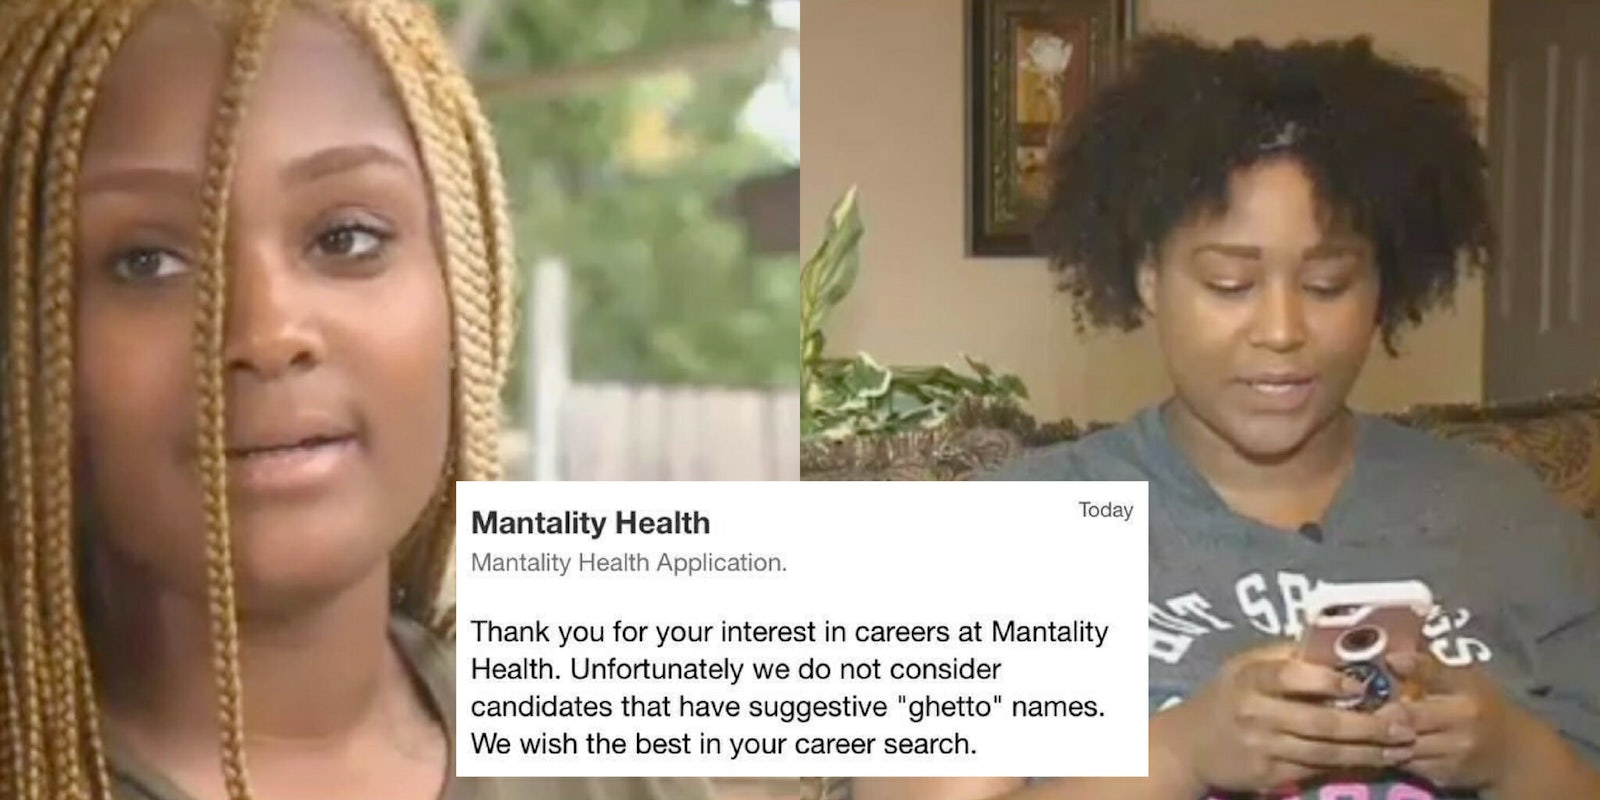 Mantality Health job applicants were told they couldn't be hired because of their 'ghetto' names.